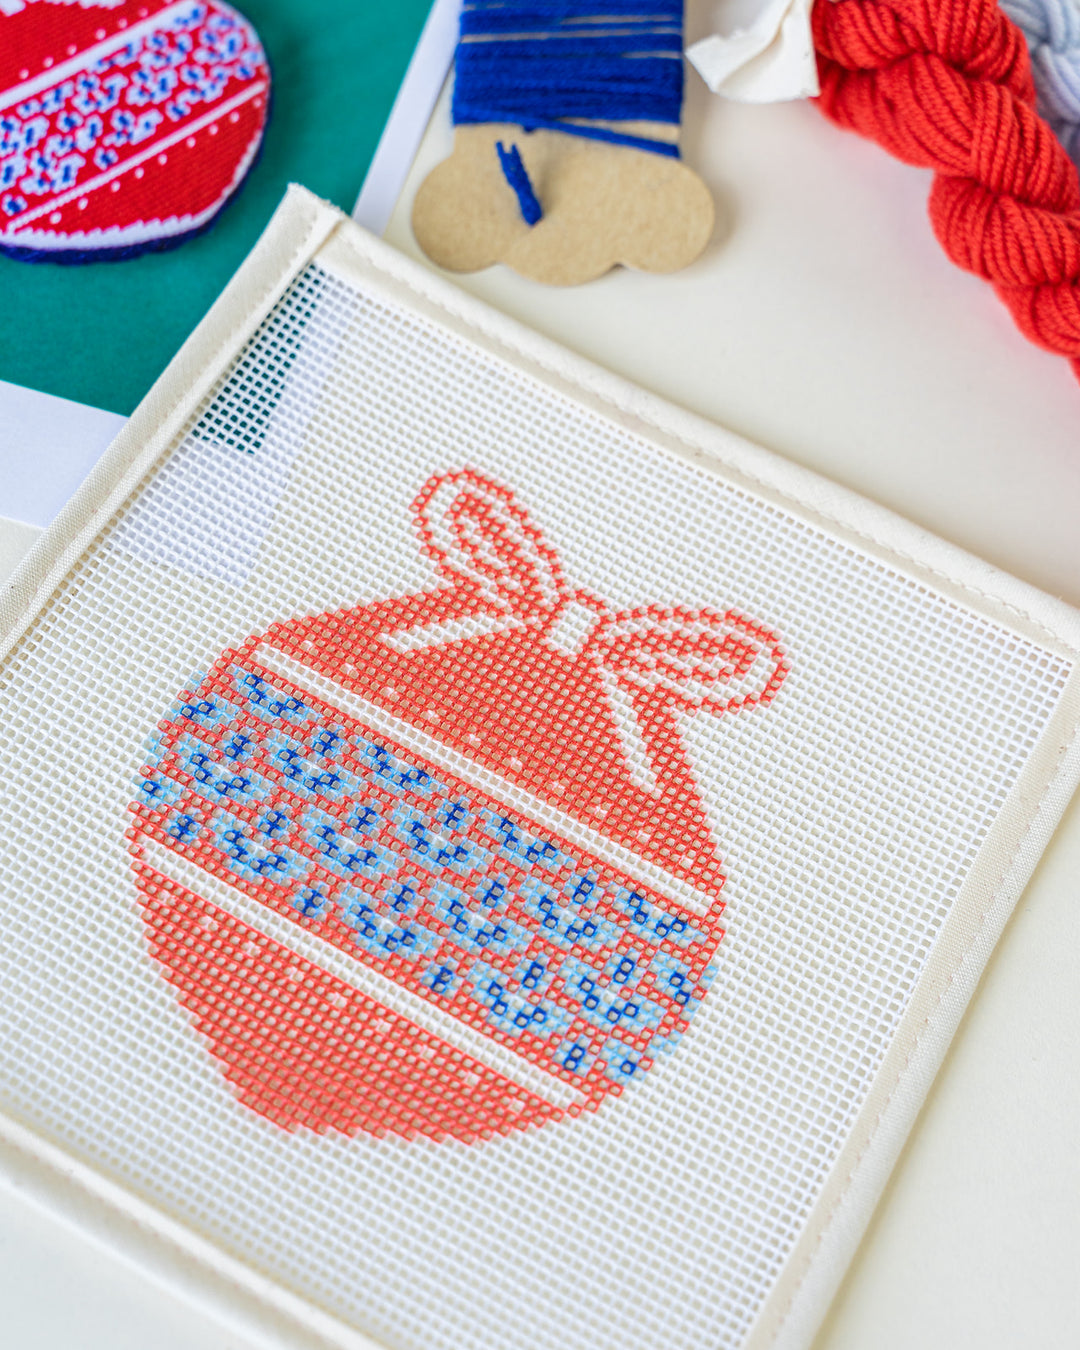 Merry Pine Bough Needlepoint Ornament Kit with canvas, threads and needles, by Unwind Studio